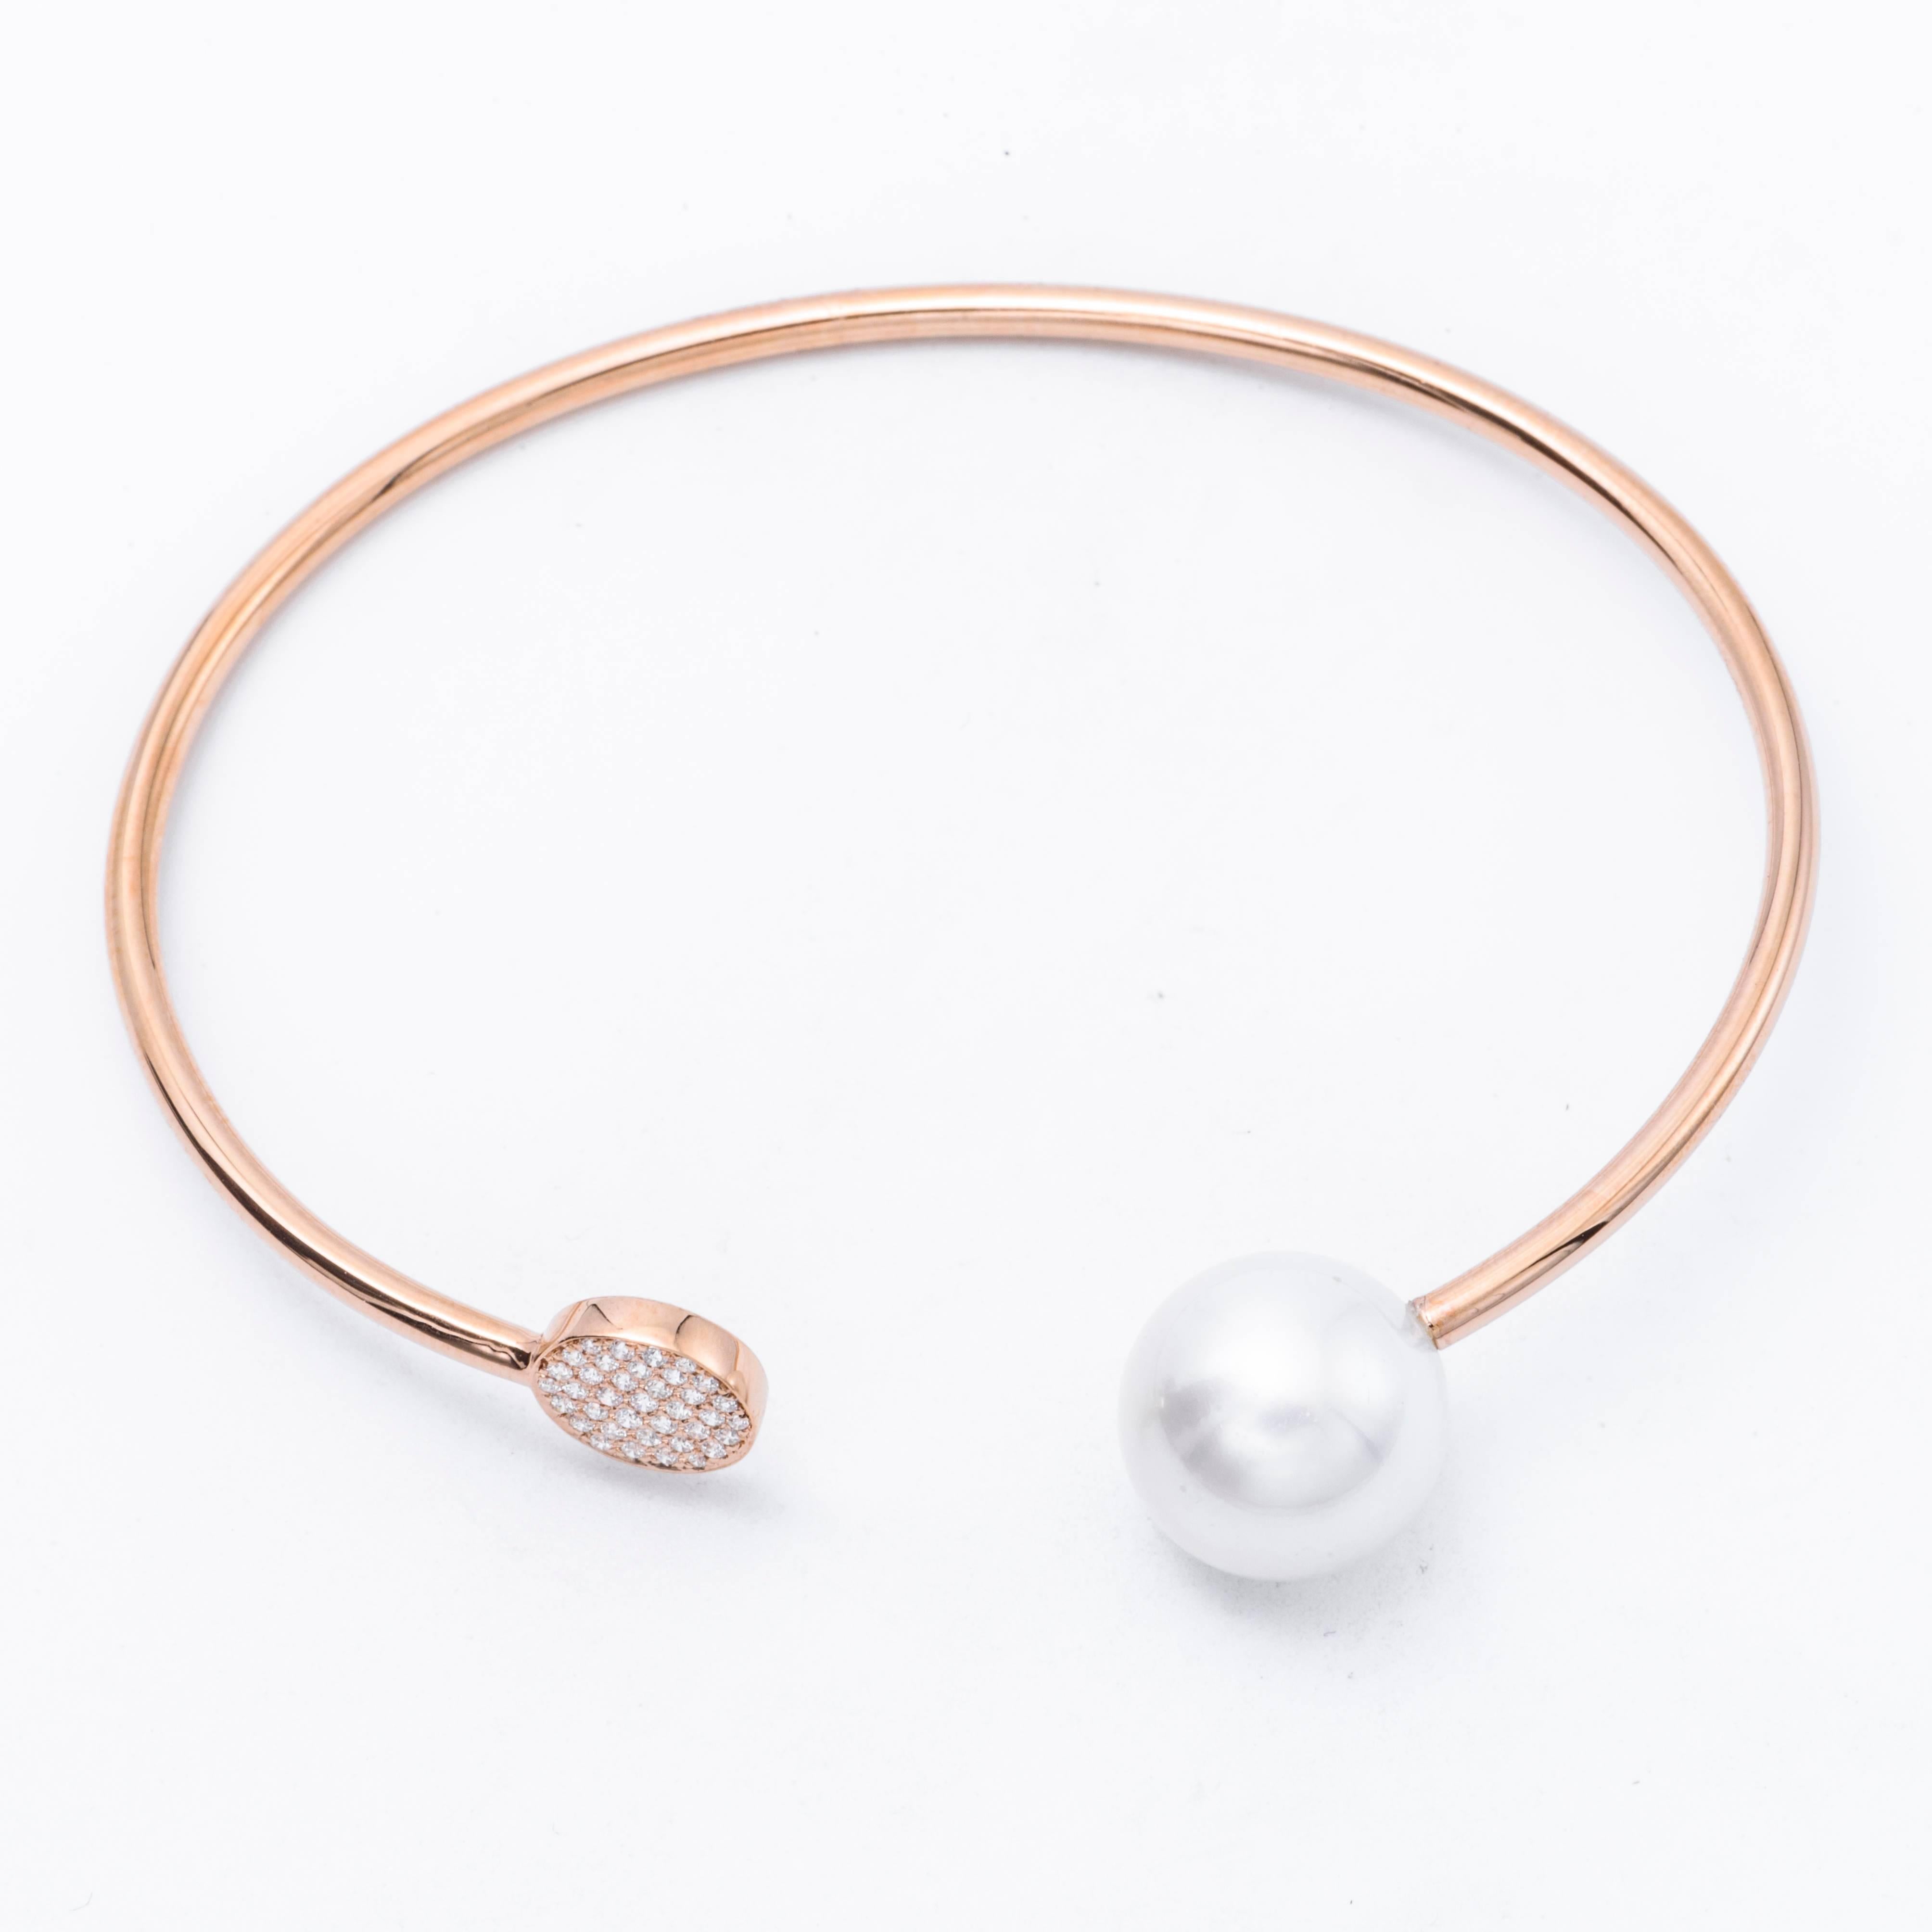 18K Rose Gold
South Sea pearl 11-12 mm
32 Diamonds 0.12 Cts.